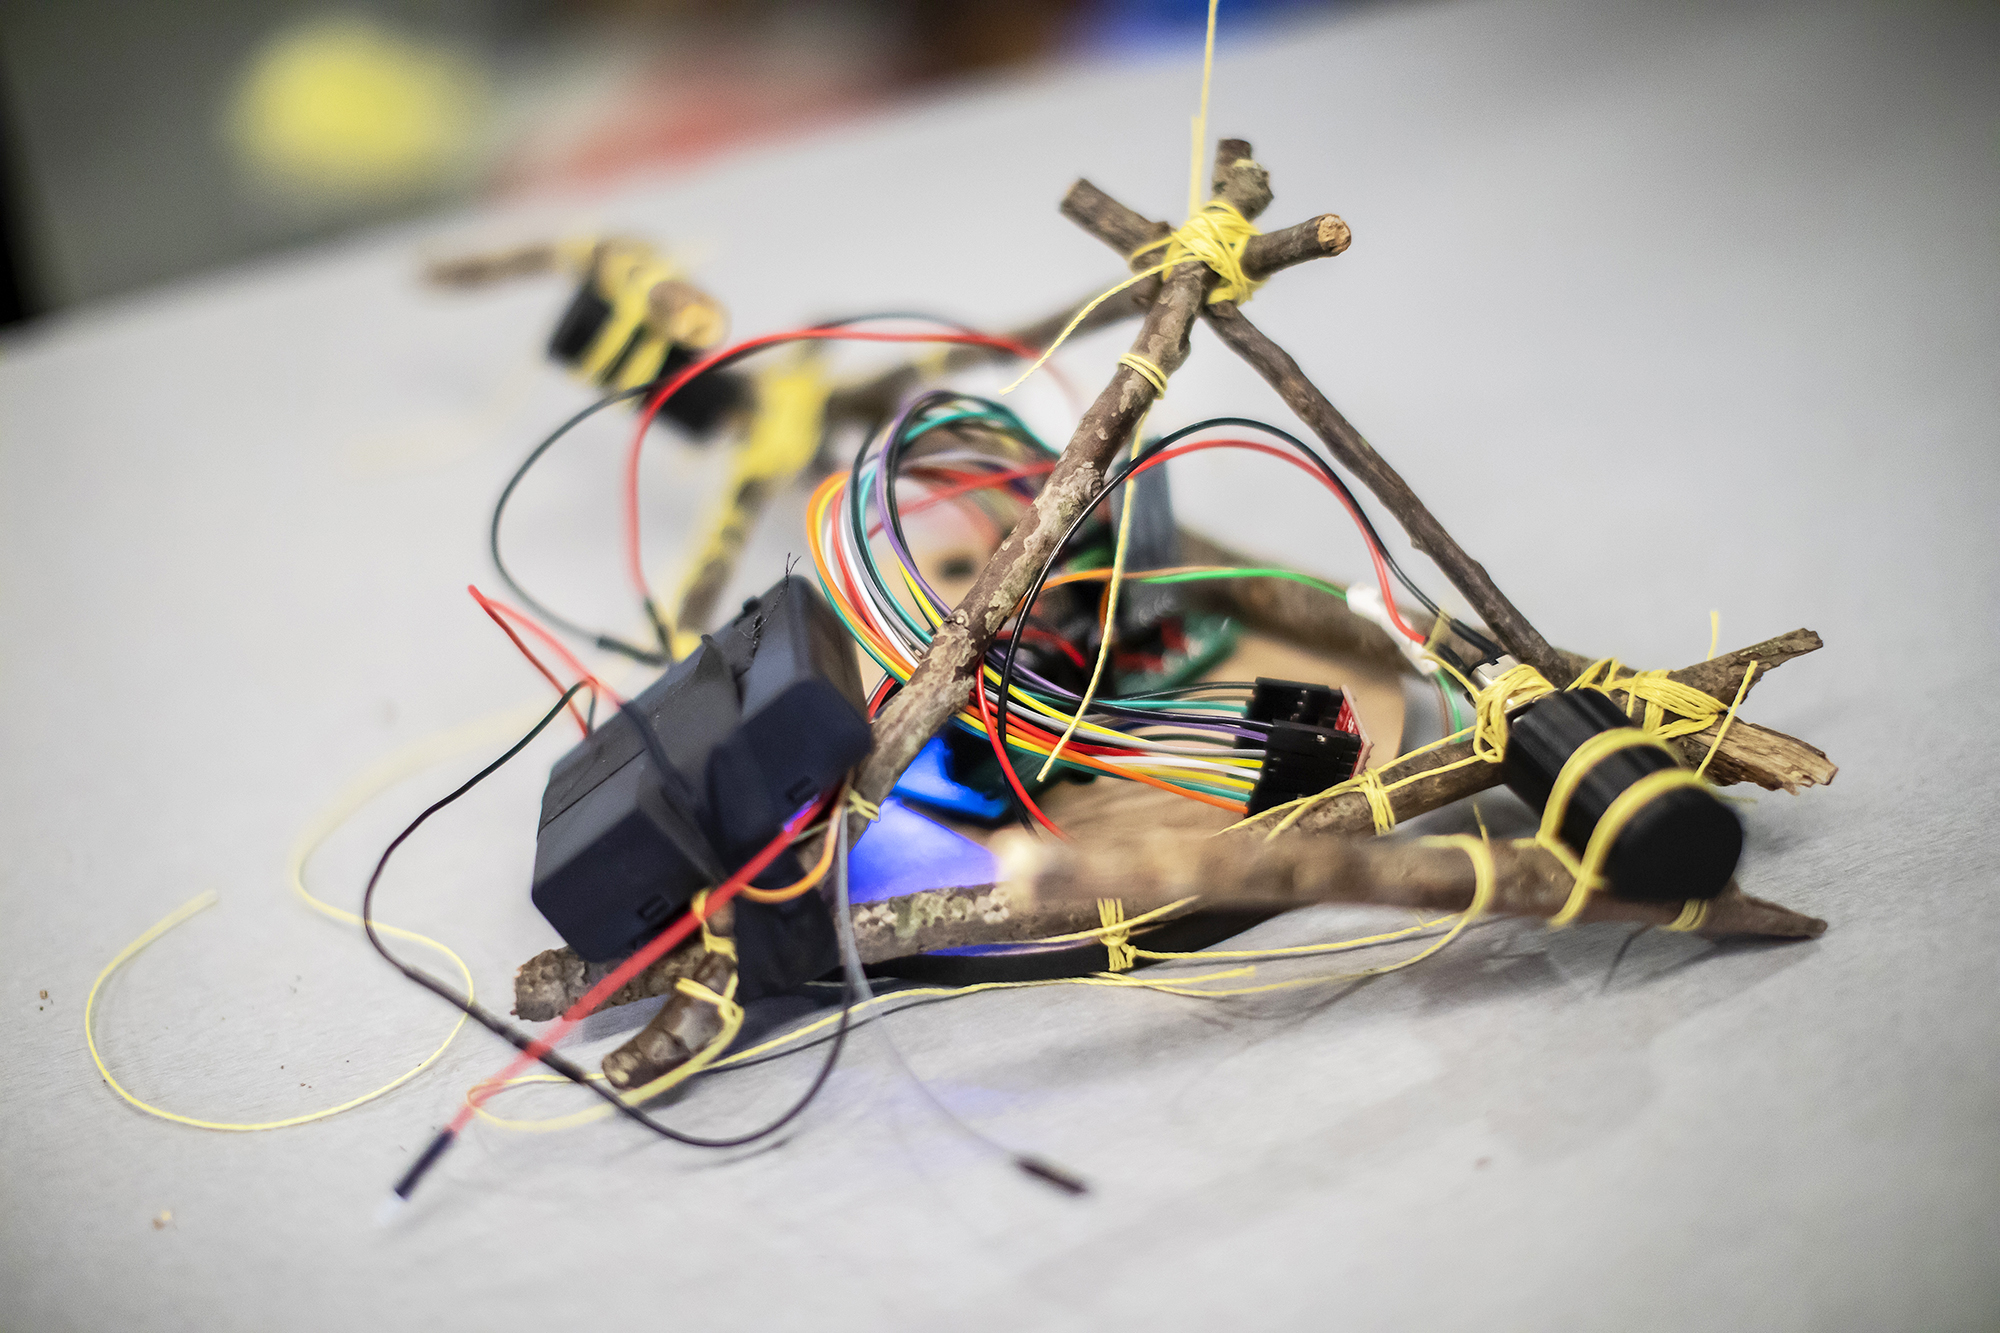 A small robot made of wires and tree twigs.